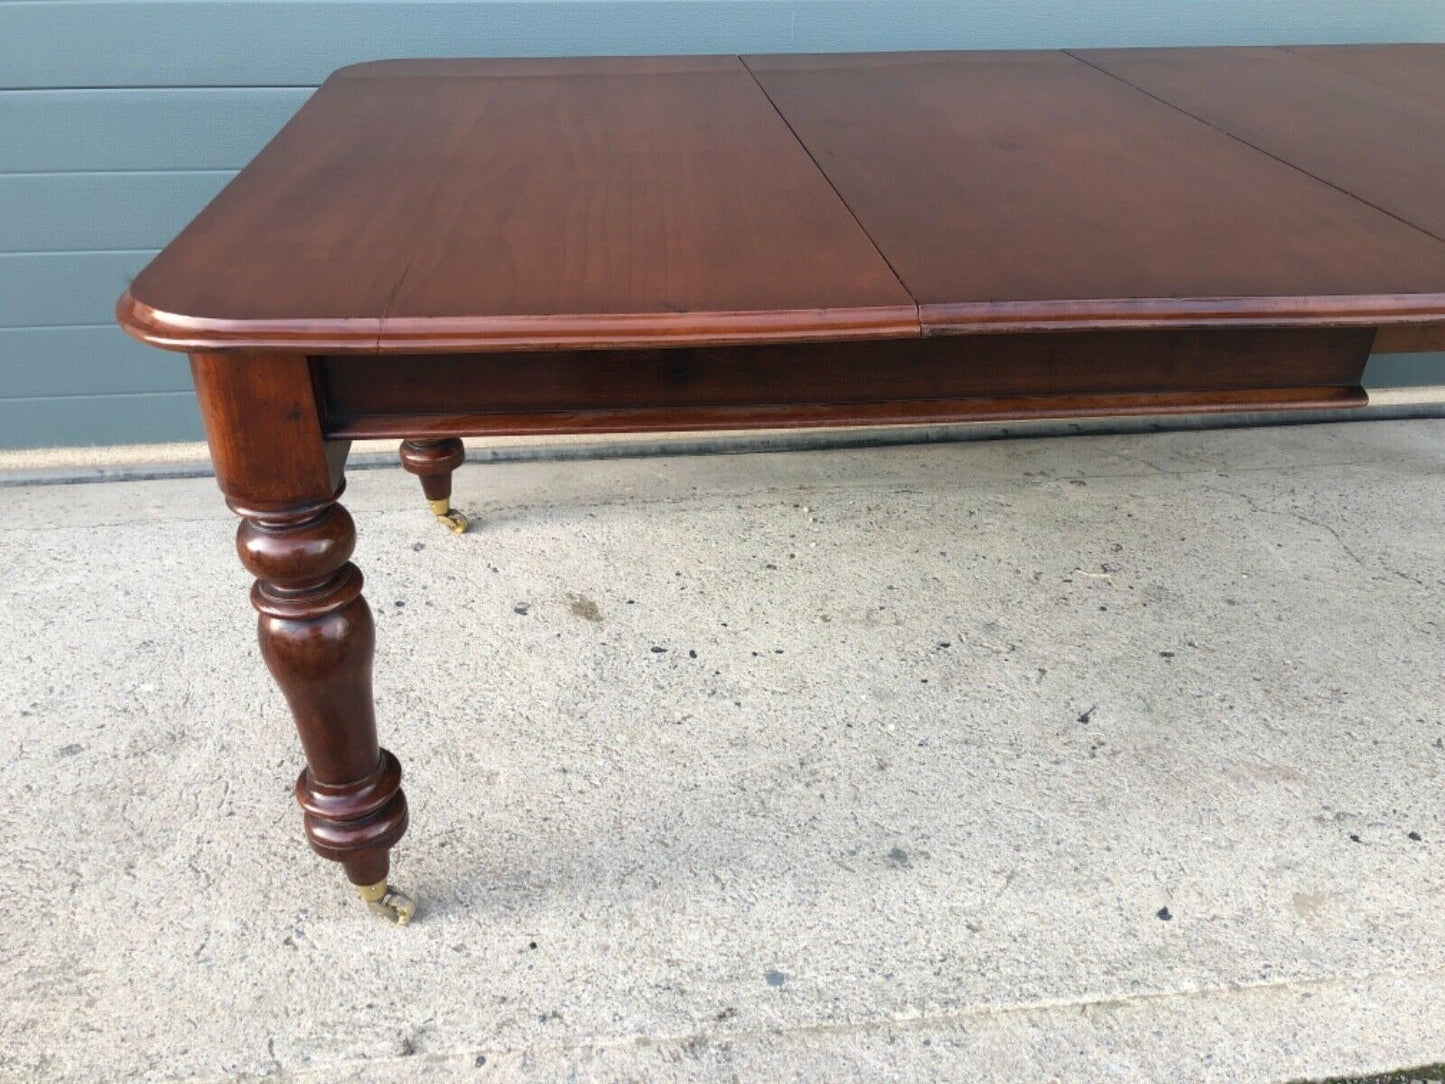 Antique Mahogany Extending Dining Table / Solid Mahogany Table ( SOLD )